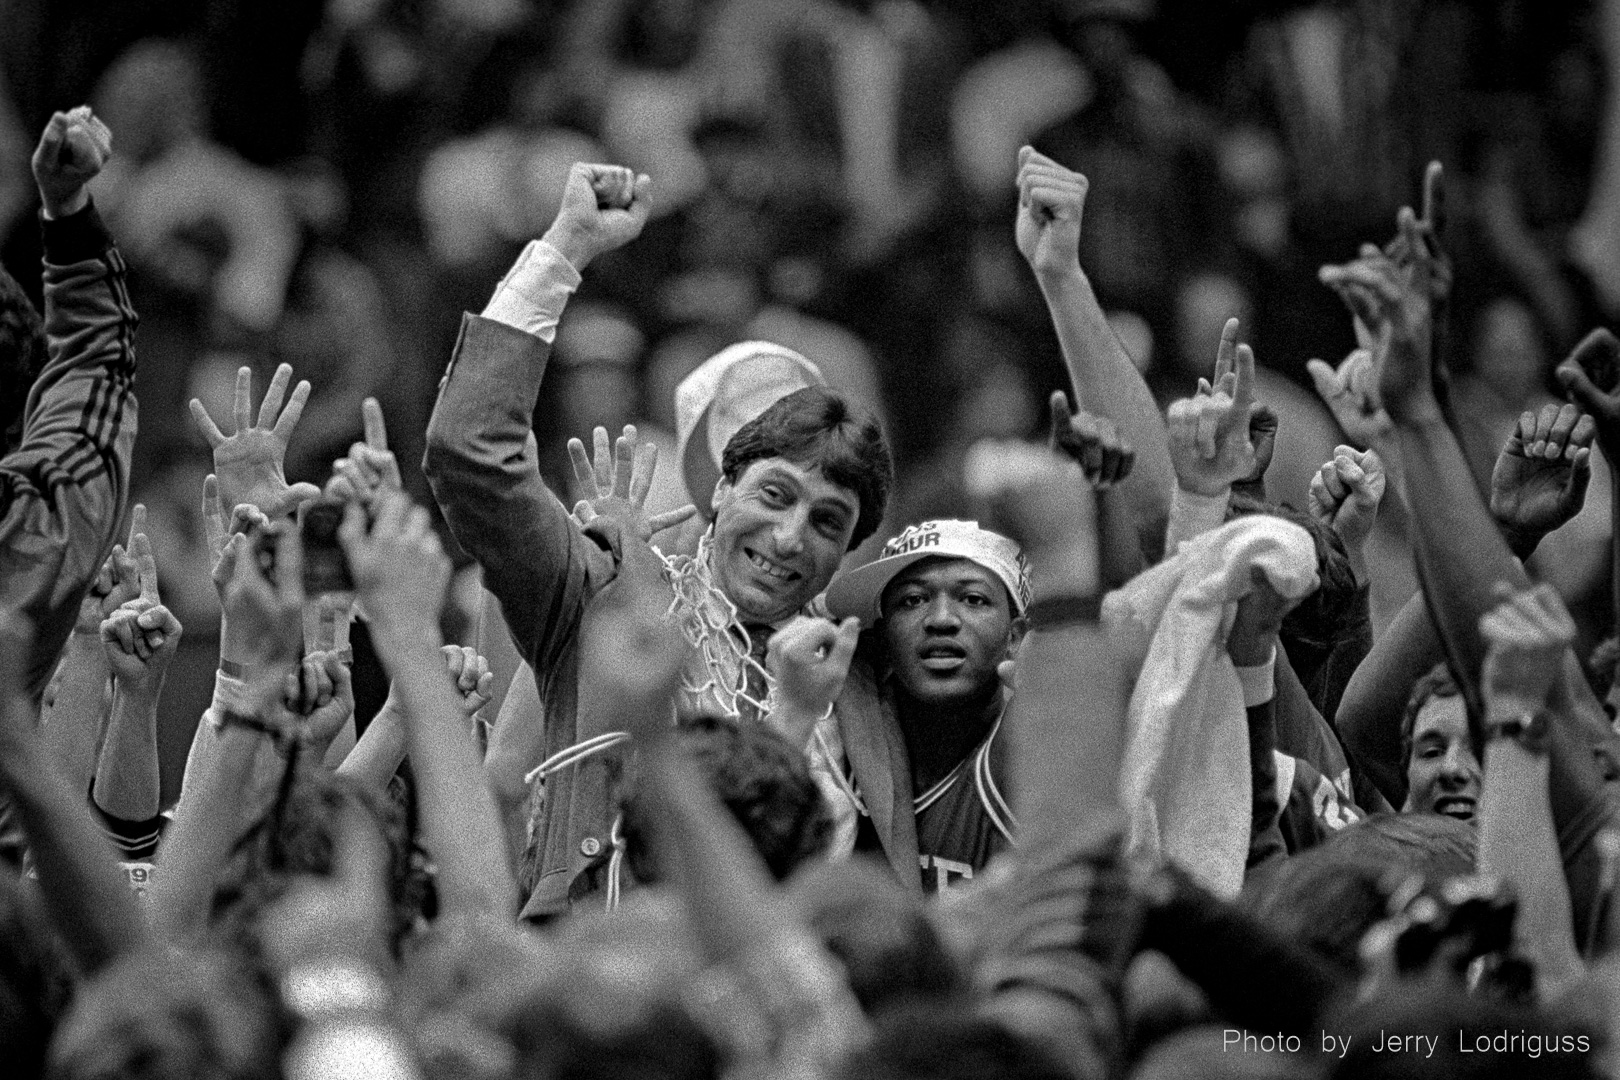 North Carolina State coach Jimmy Valvano celebrates the Wolfpack's victory over Houston with Derrick Whittenberg after cutting down the nets after they won the NCAA Men's Basketball National Championship in Albuquerque in 1983.